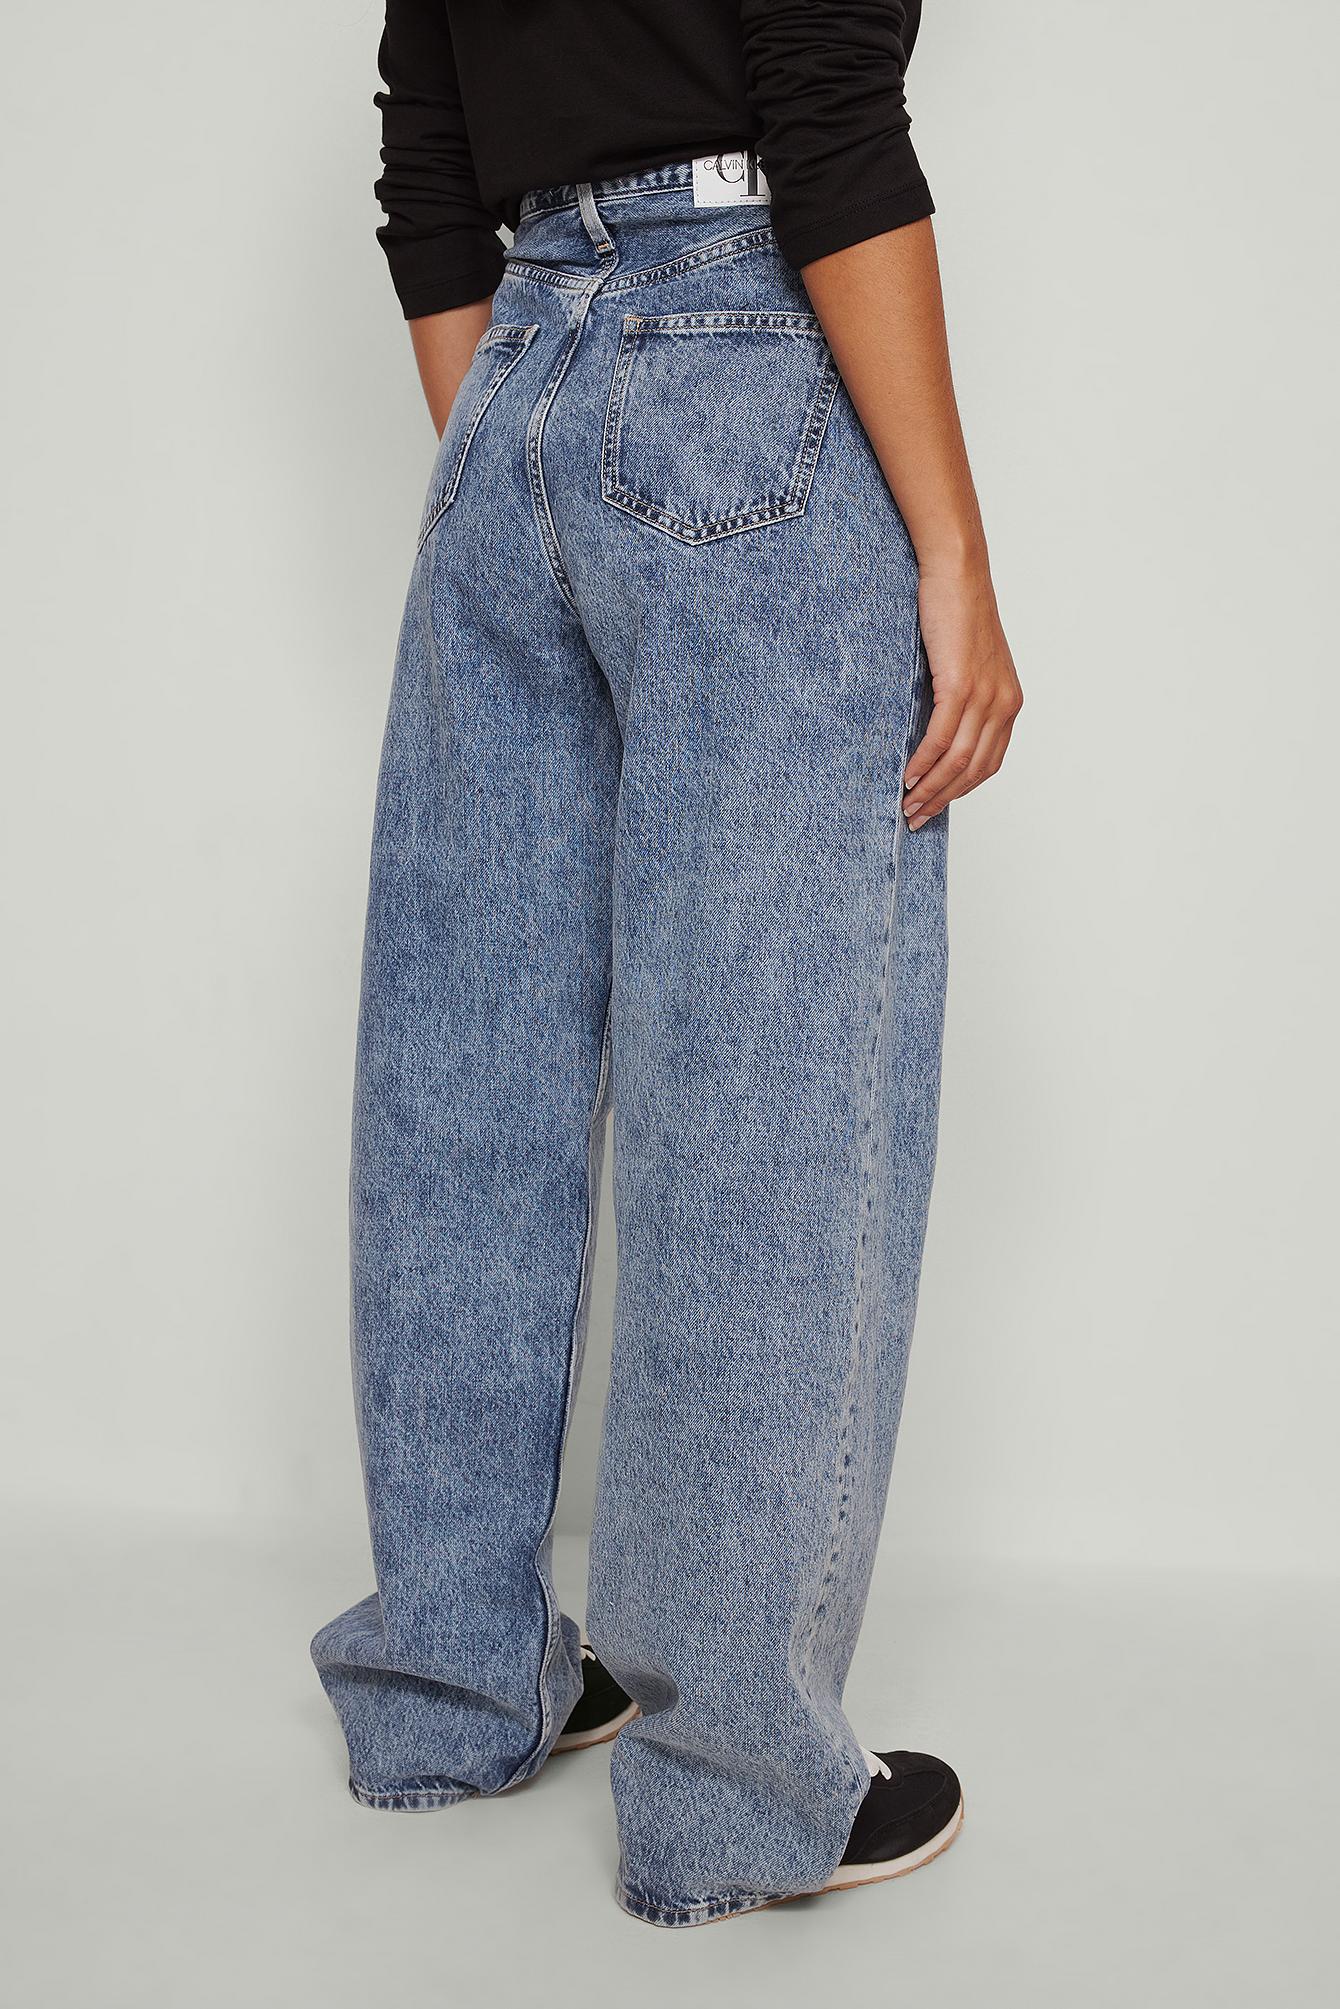 Calvin Klein High Rise Relaxed Jeans in Blue | Lyst